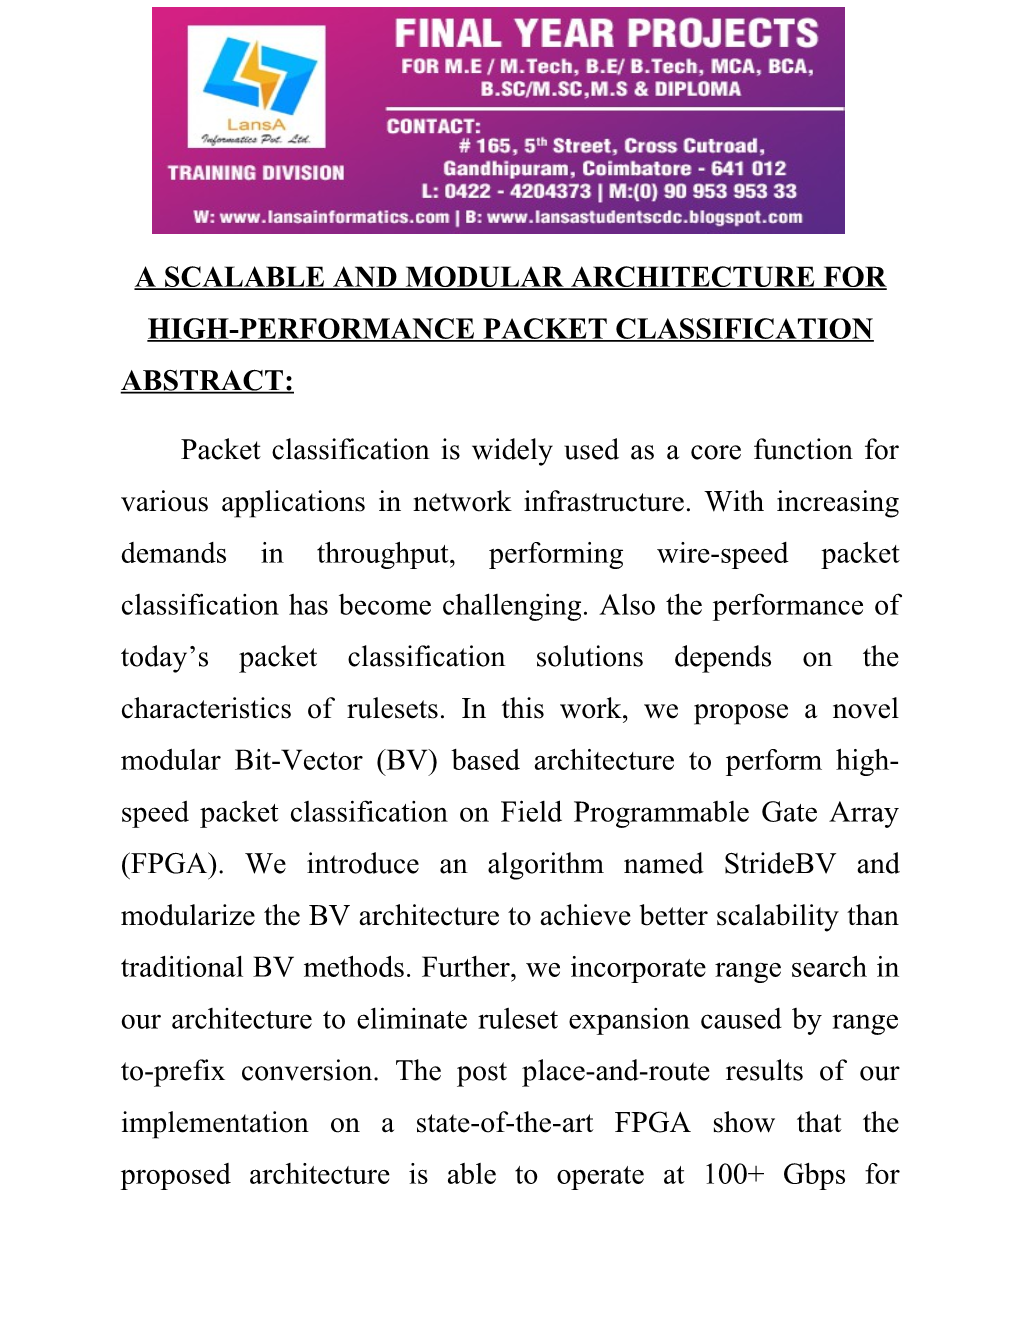 A Scalable and Modular Architecture for High-Performance Packet Classification